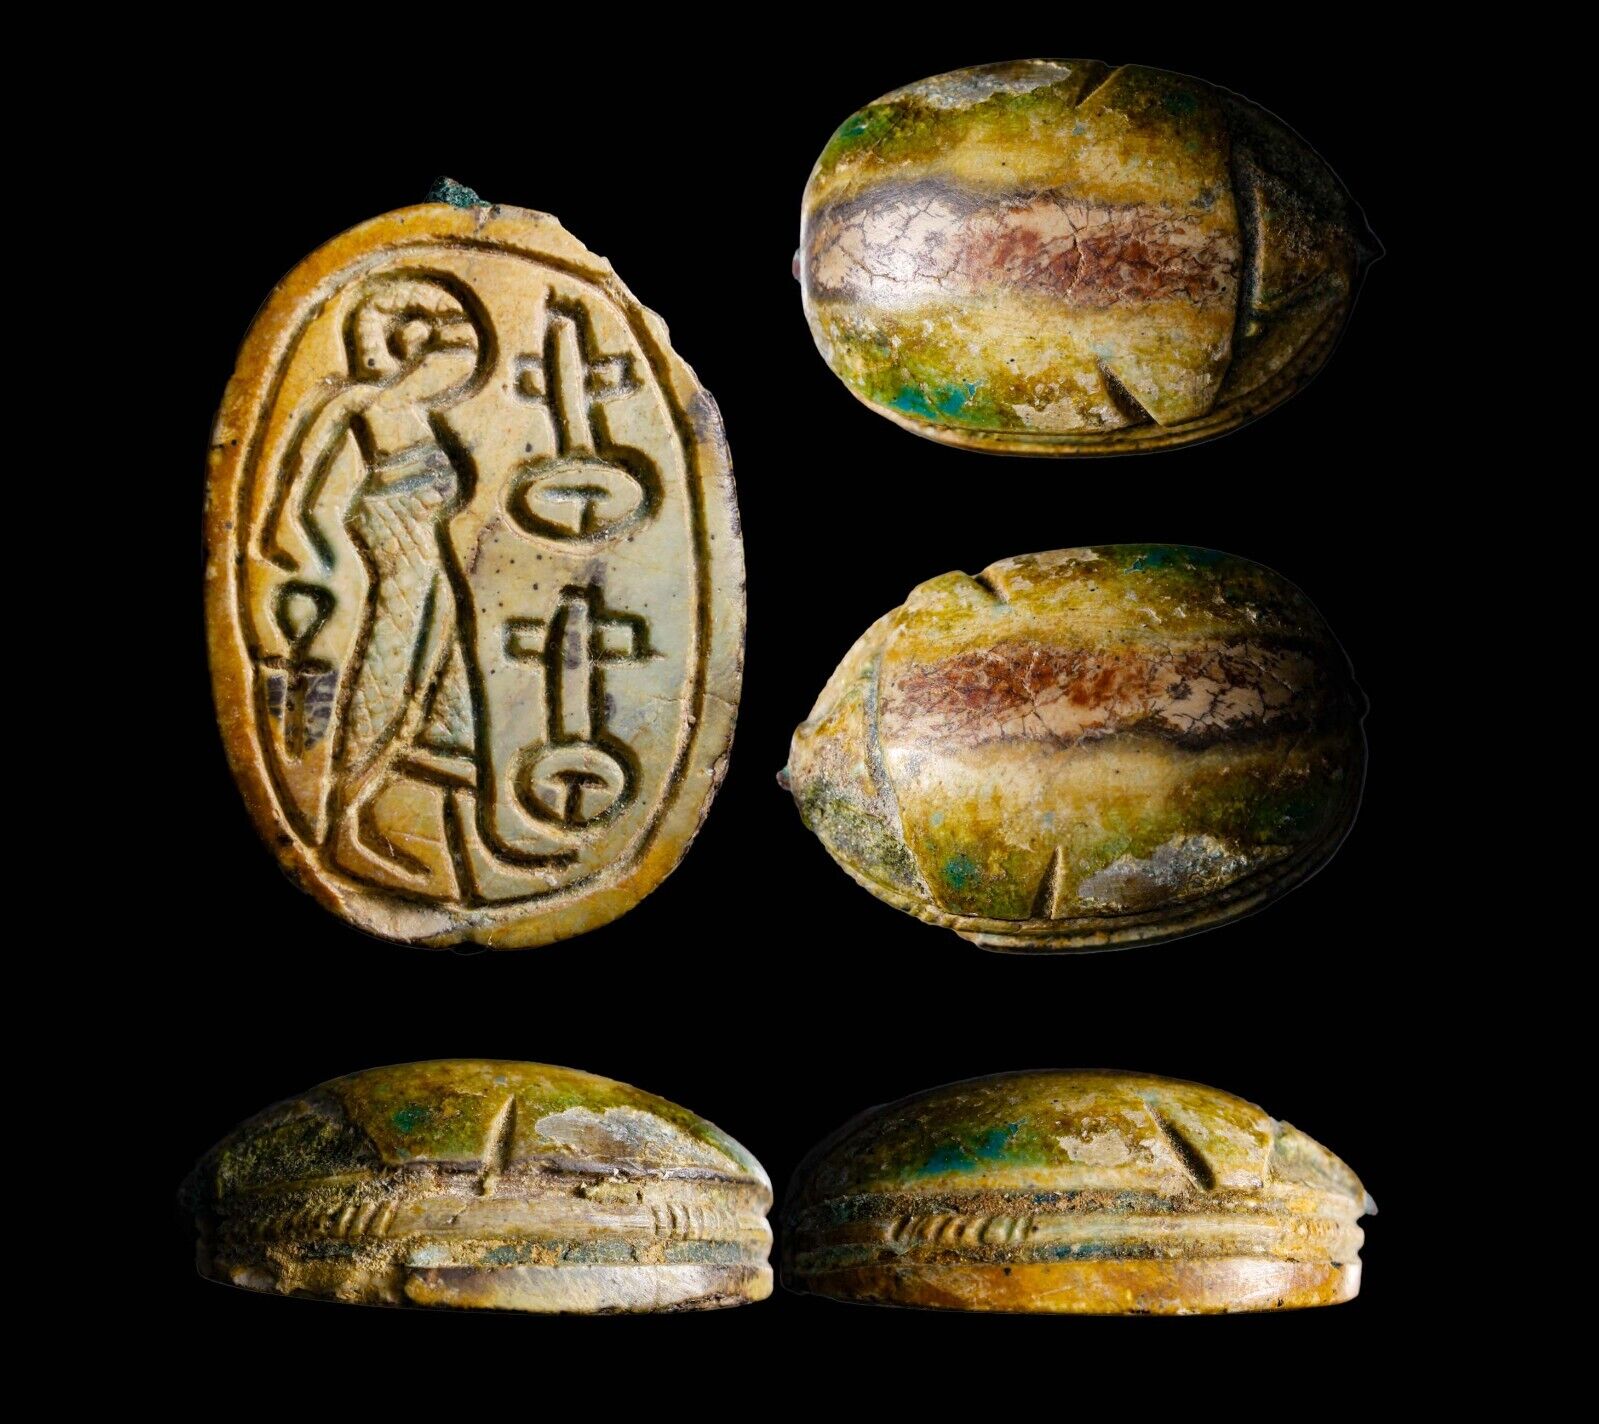 EXTREMELY RARE Scarab Ancient Egypt Artifact Antiquity Ankh and Symbols w/COA